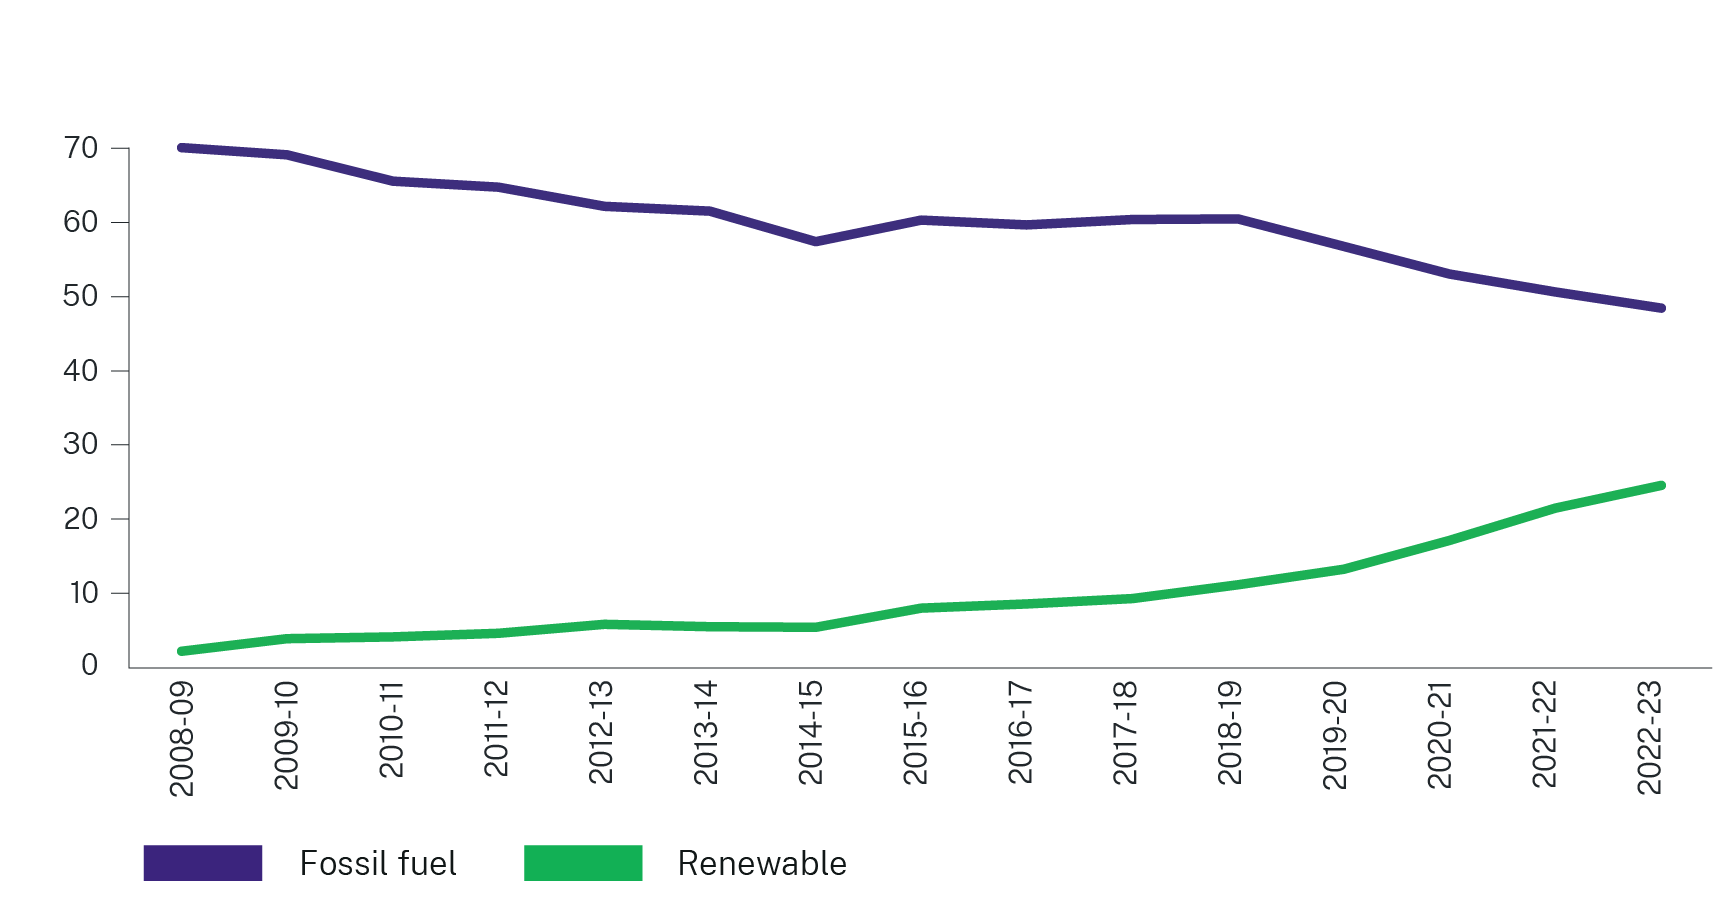 Graph from 2008-09 to 2022-23 showing an overall decrease in fossil fuel consumption and overall increase in renewable energy consumption